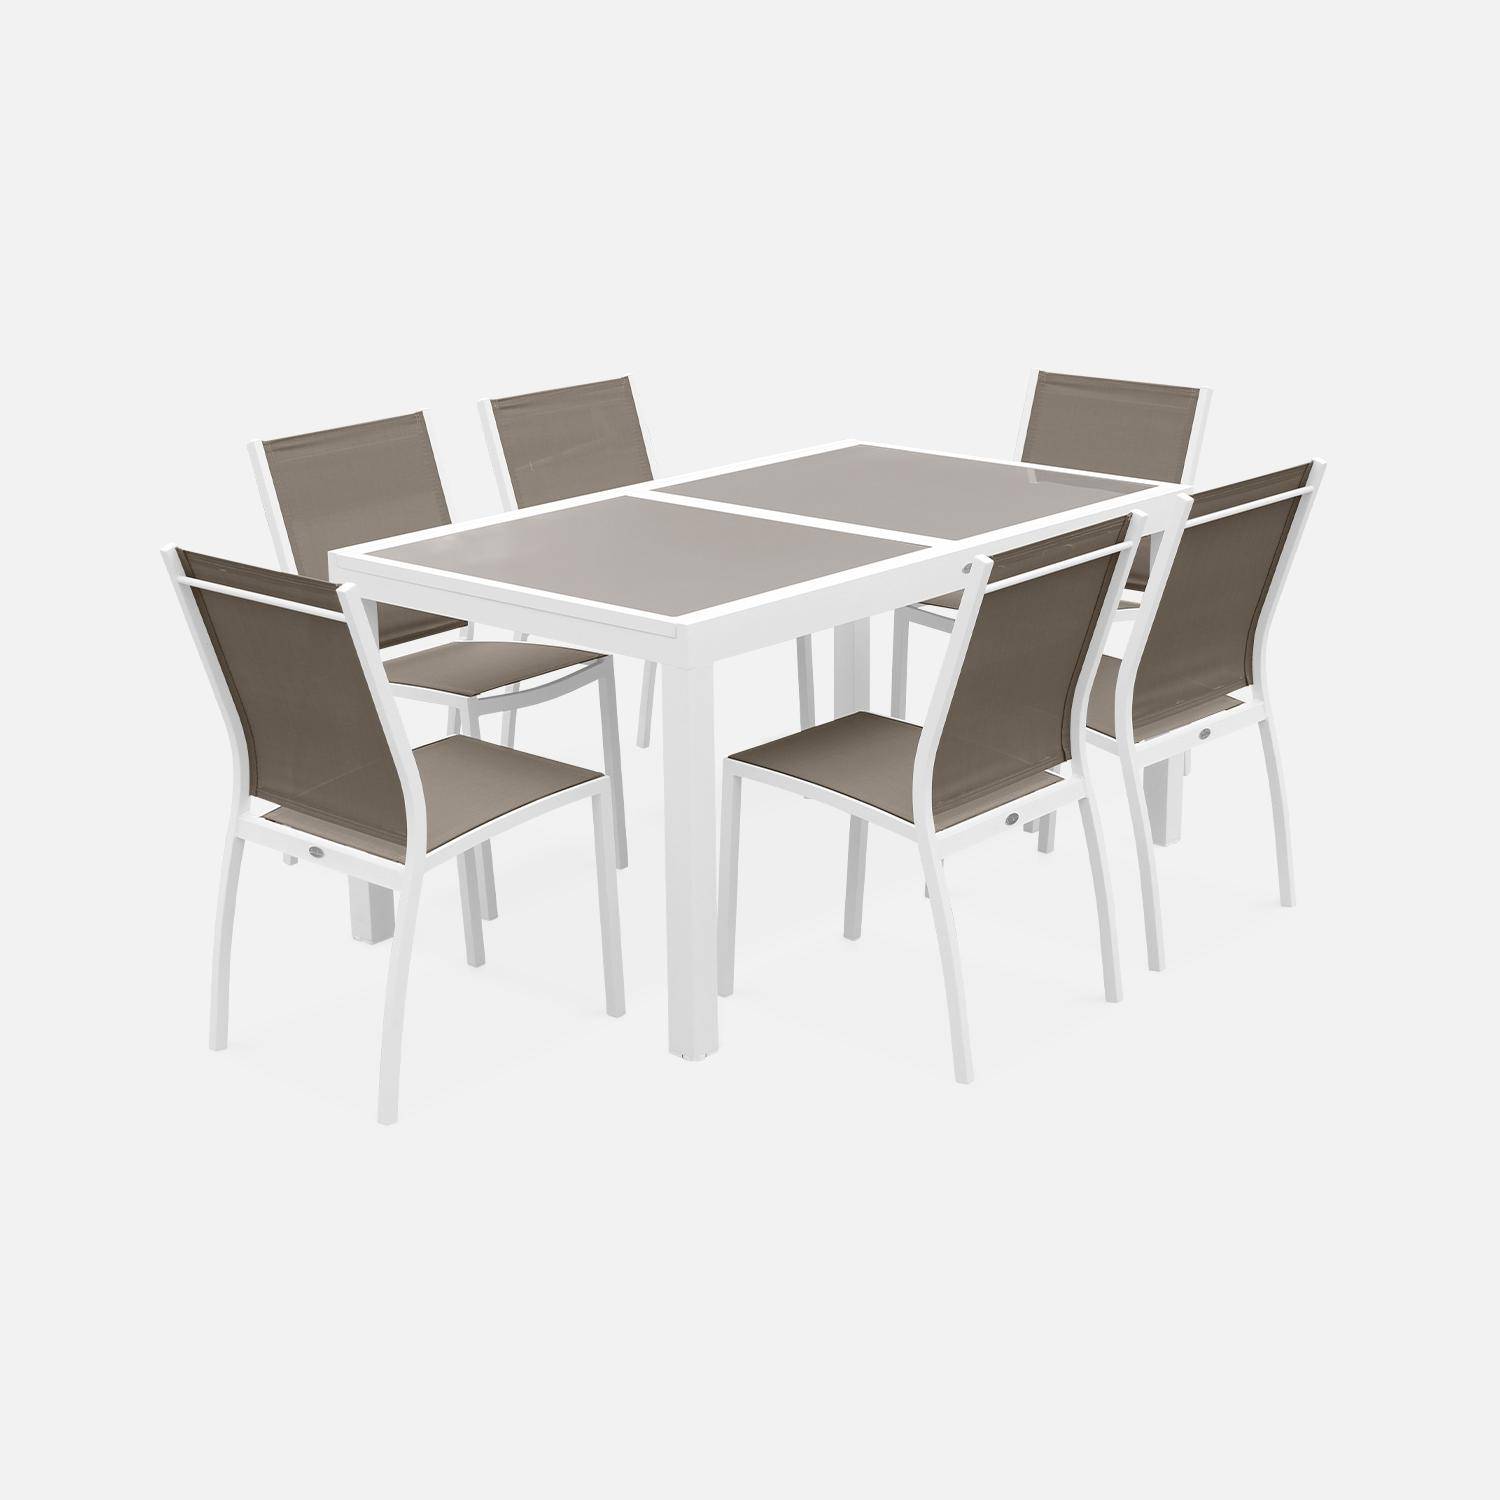 6-seater garden dining set, extendable 150-210cm aluminium table and 6 chairs - Orlando - White frame, Beige-Brown textilene,sweeek,Photo3